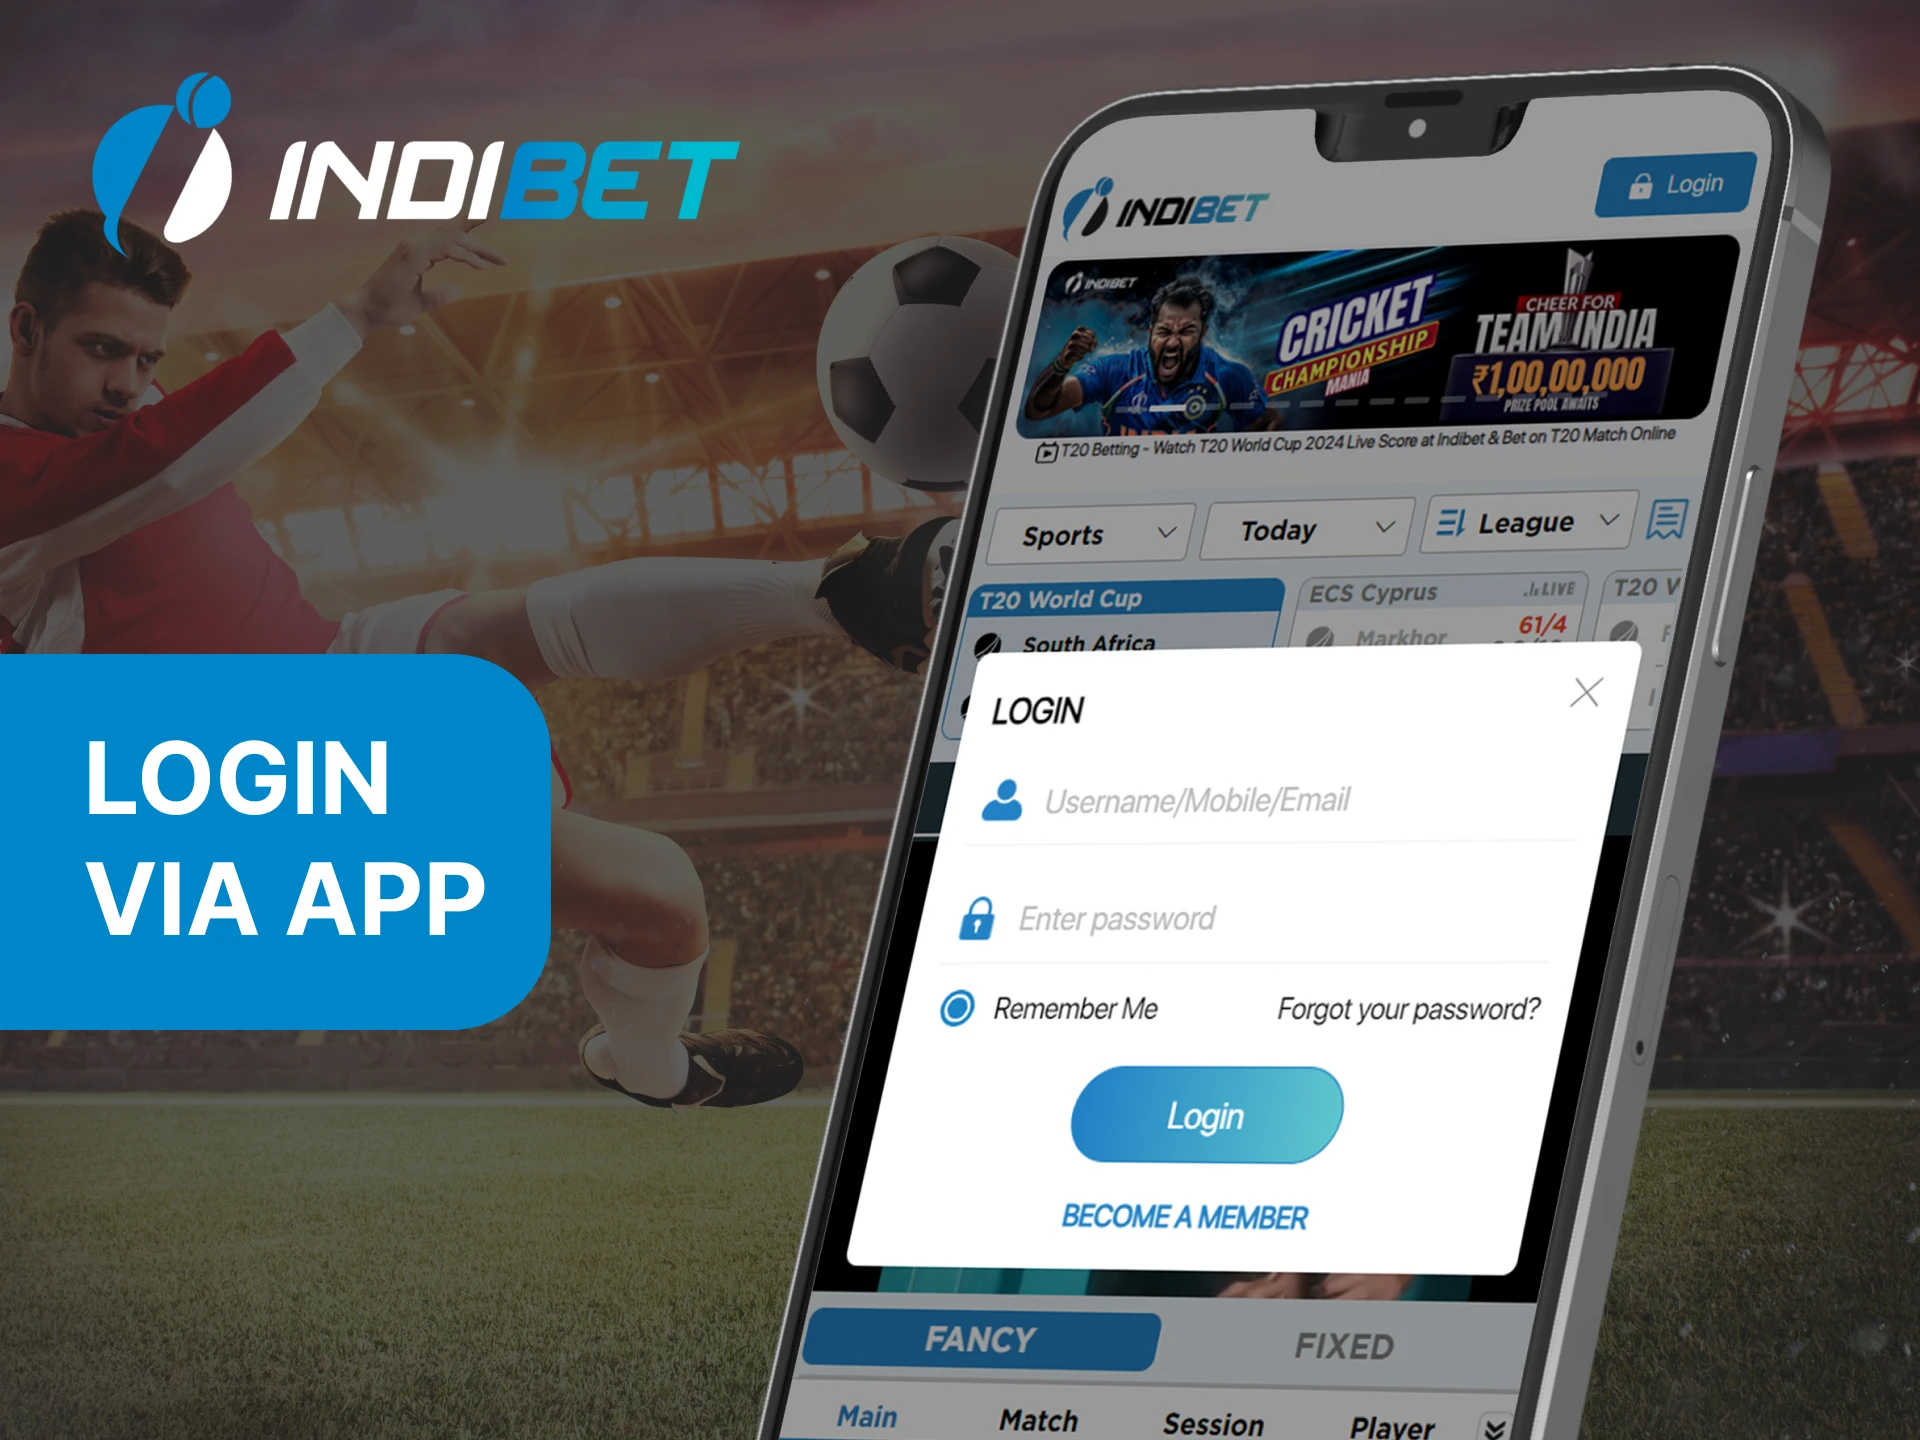 Login to your Indibet account using the mobile app.